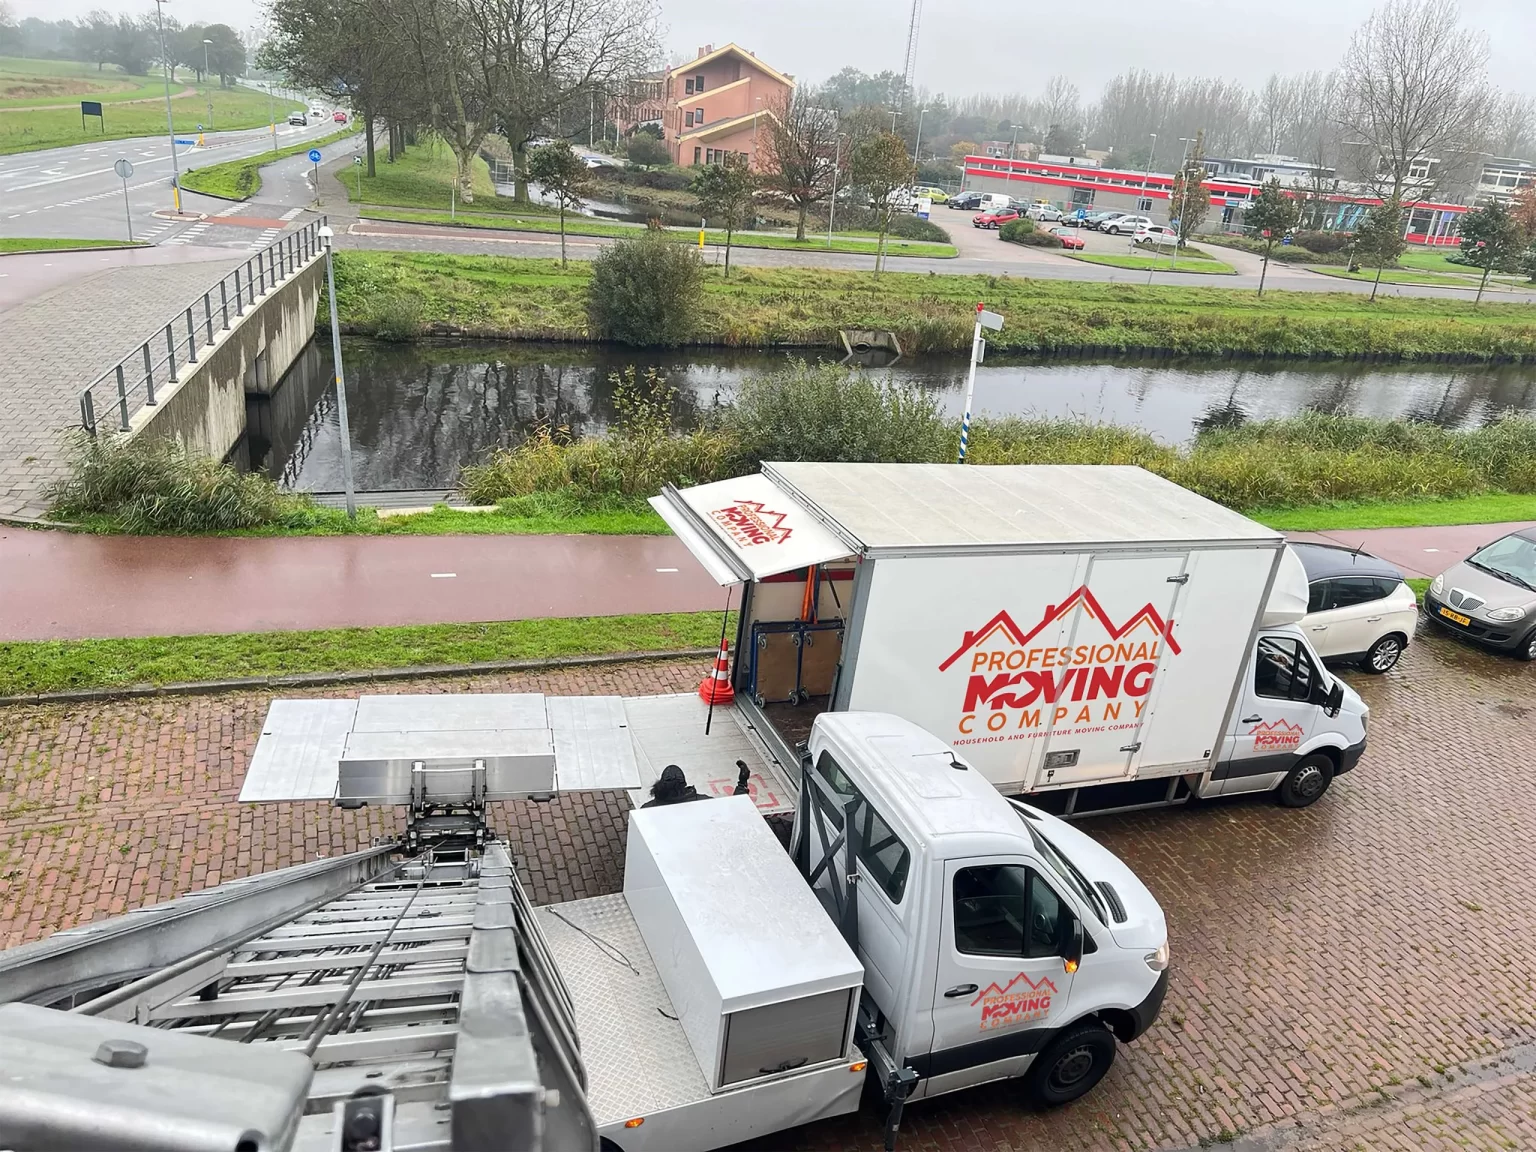 Moving Company Leiderdorp | Covering the Netherlands: Our Reach Beyond Leiderdorp